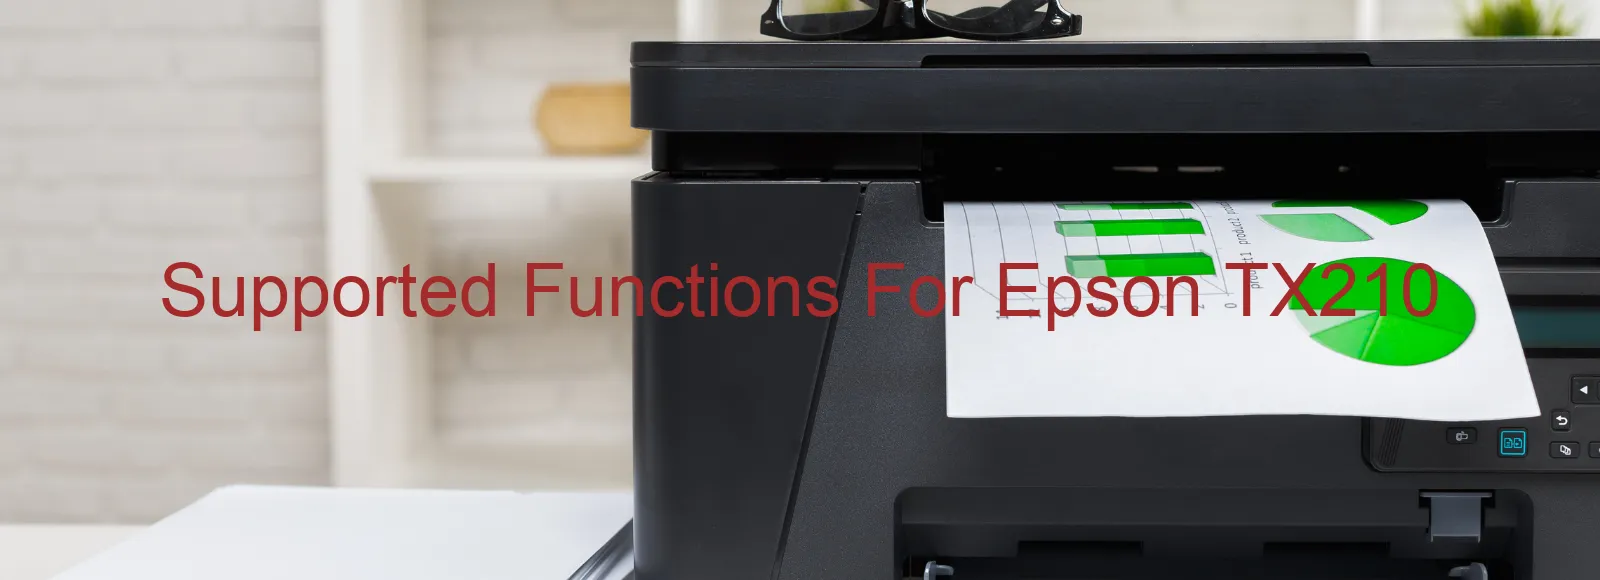 supported-functions-for-epson-tx210.webp